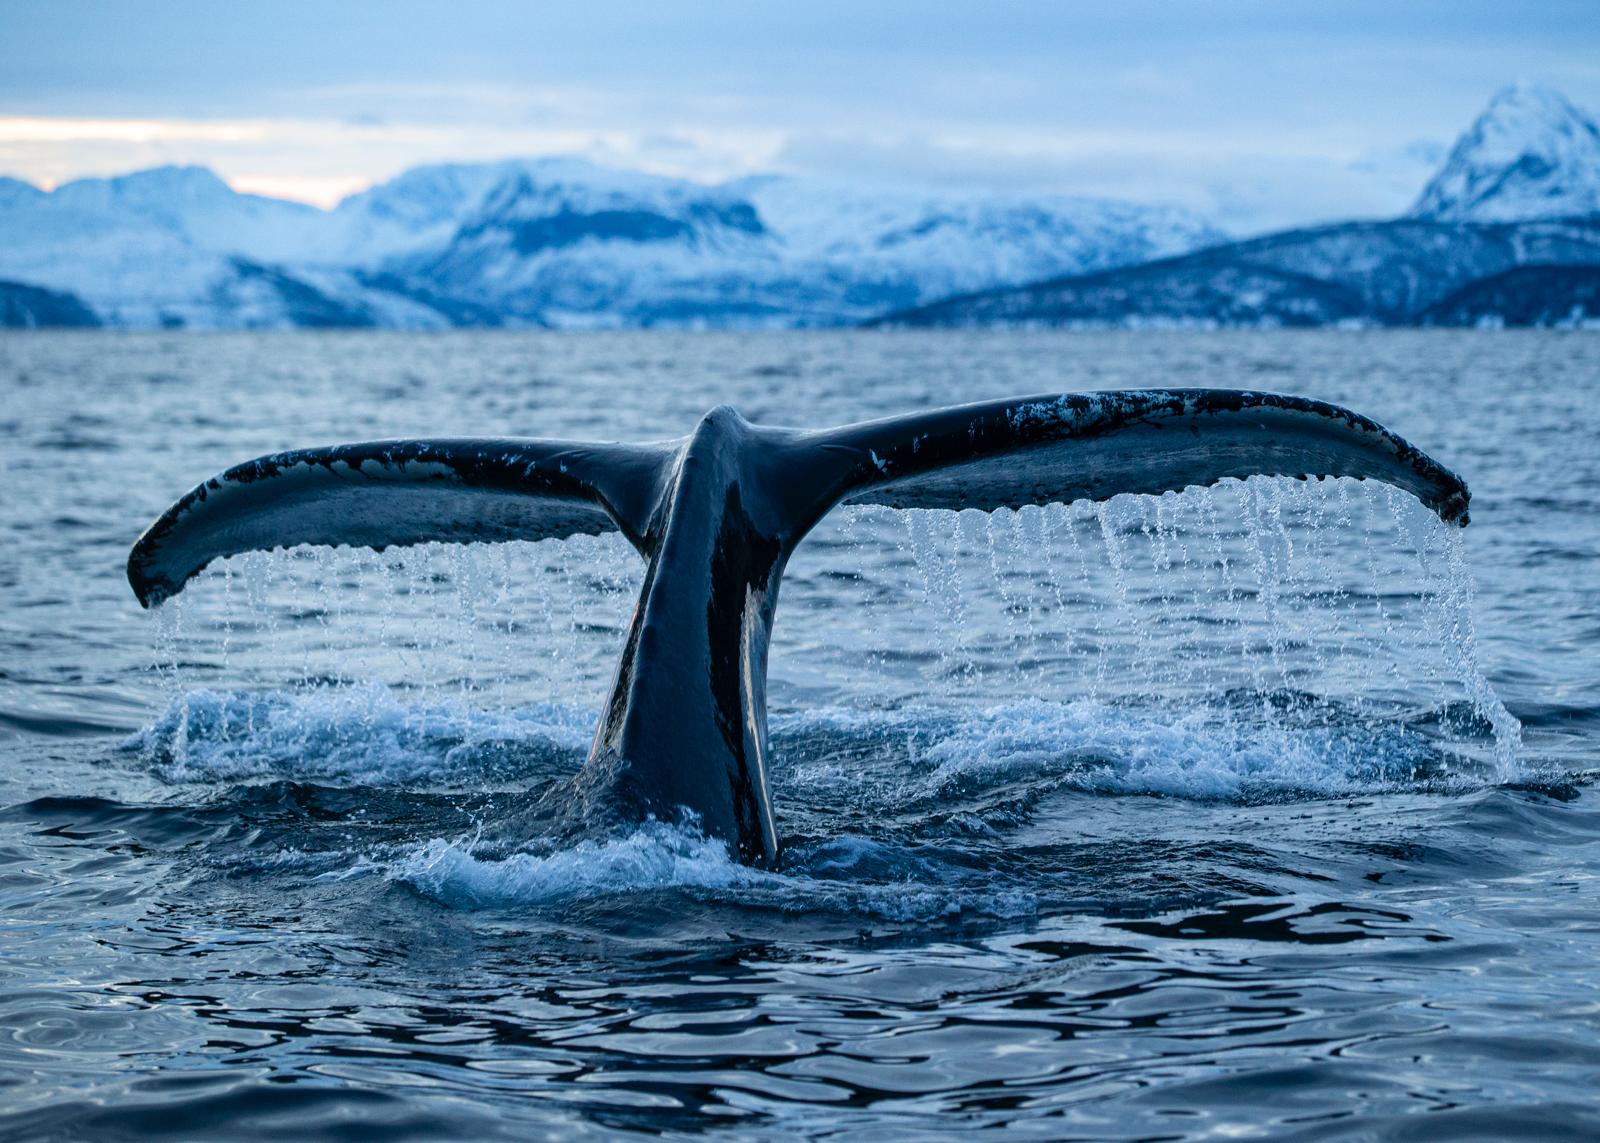 Whale tail by Piet fotograaf TEAM MAPITO